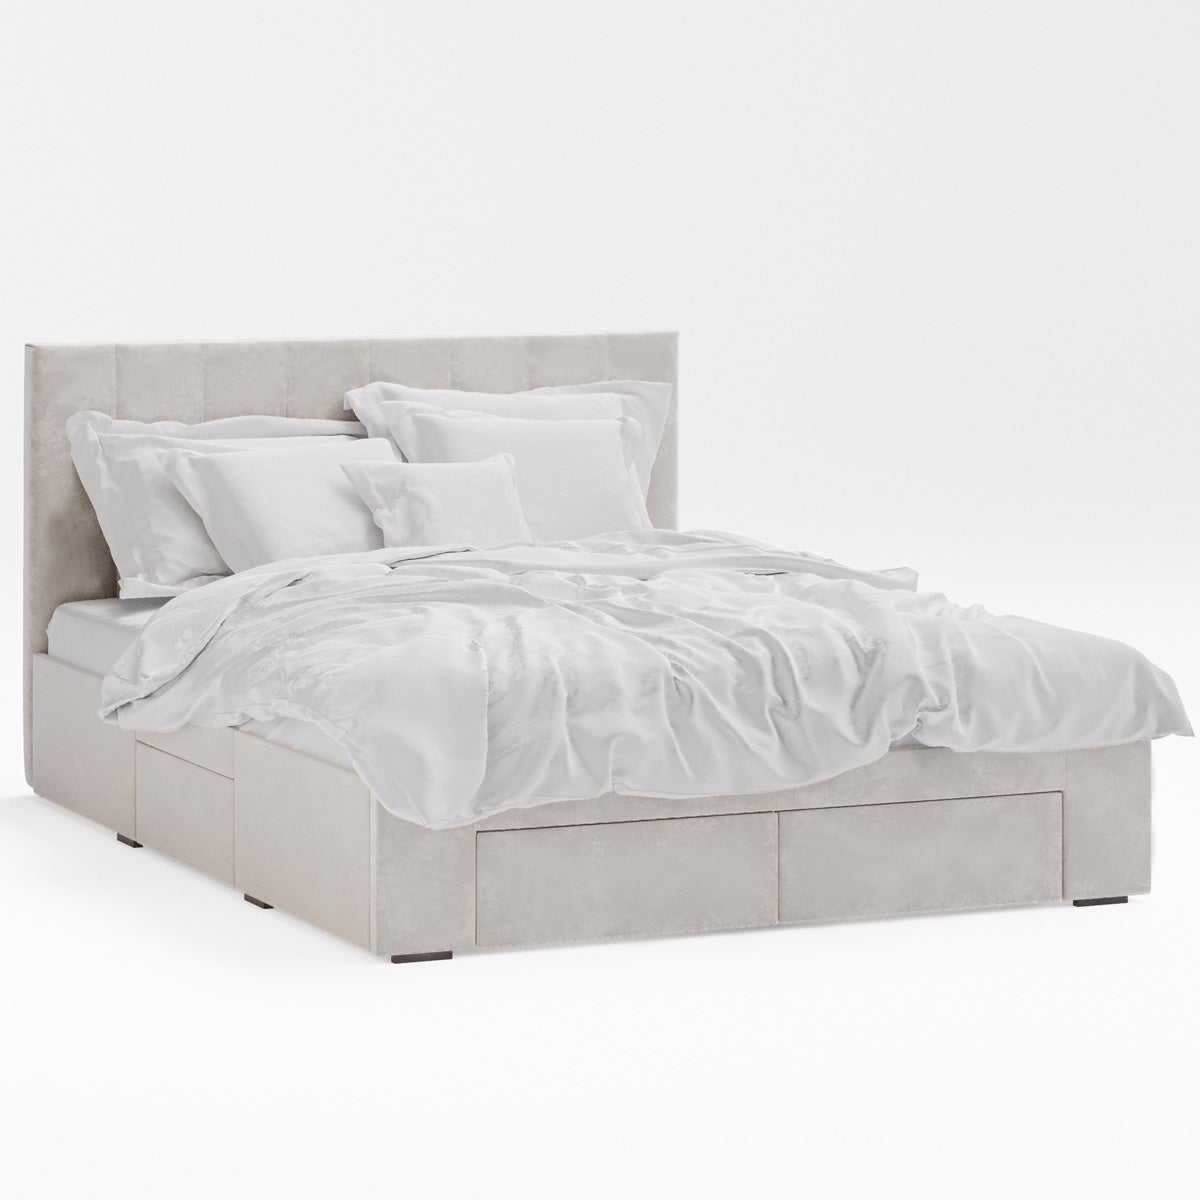 Ormond Storage Bed Frame with Four Extra Large Drawers (Taupe White Velvet)